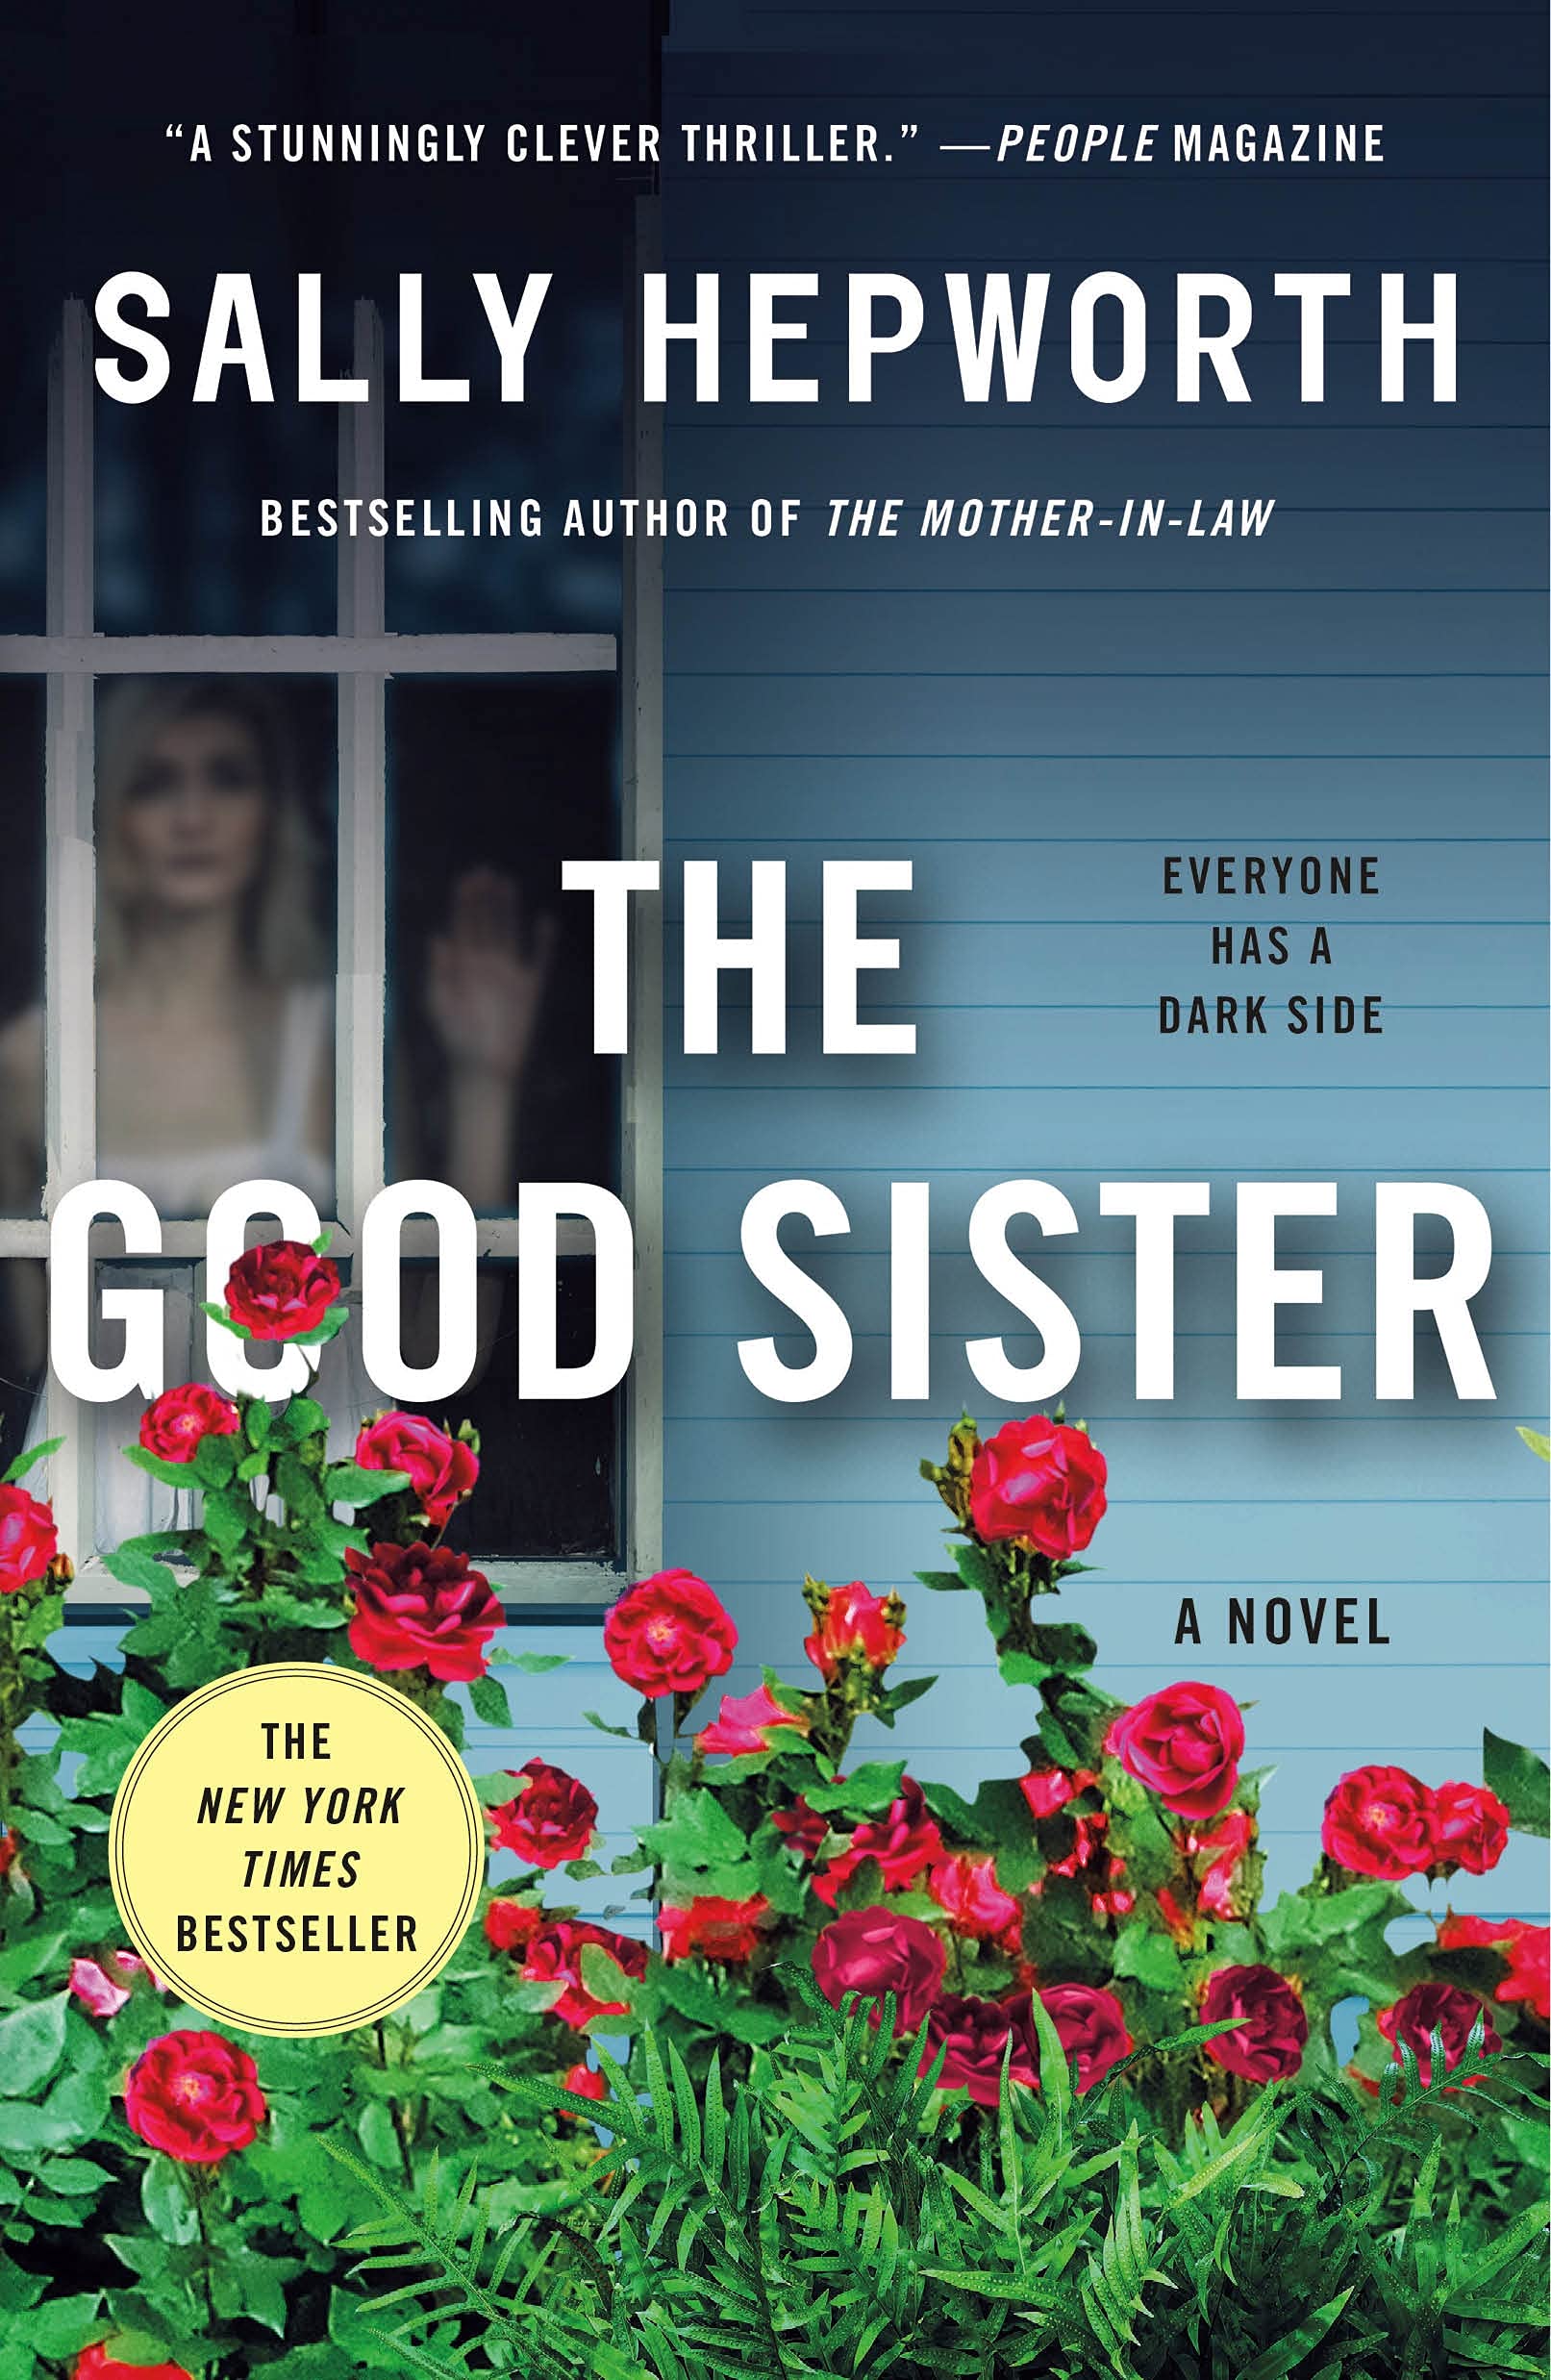 Image for "The Good Sister"